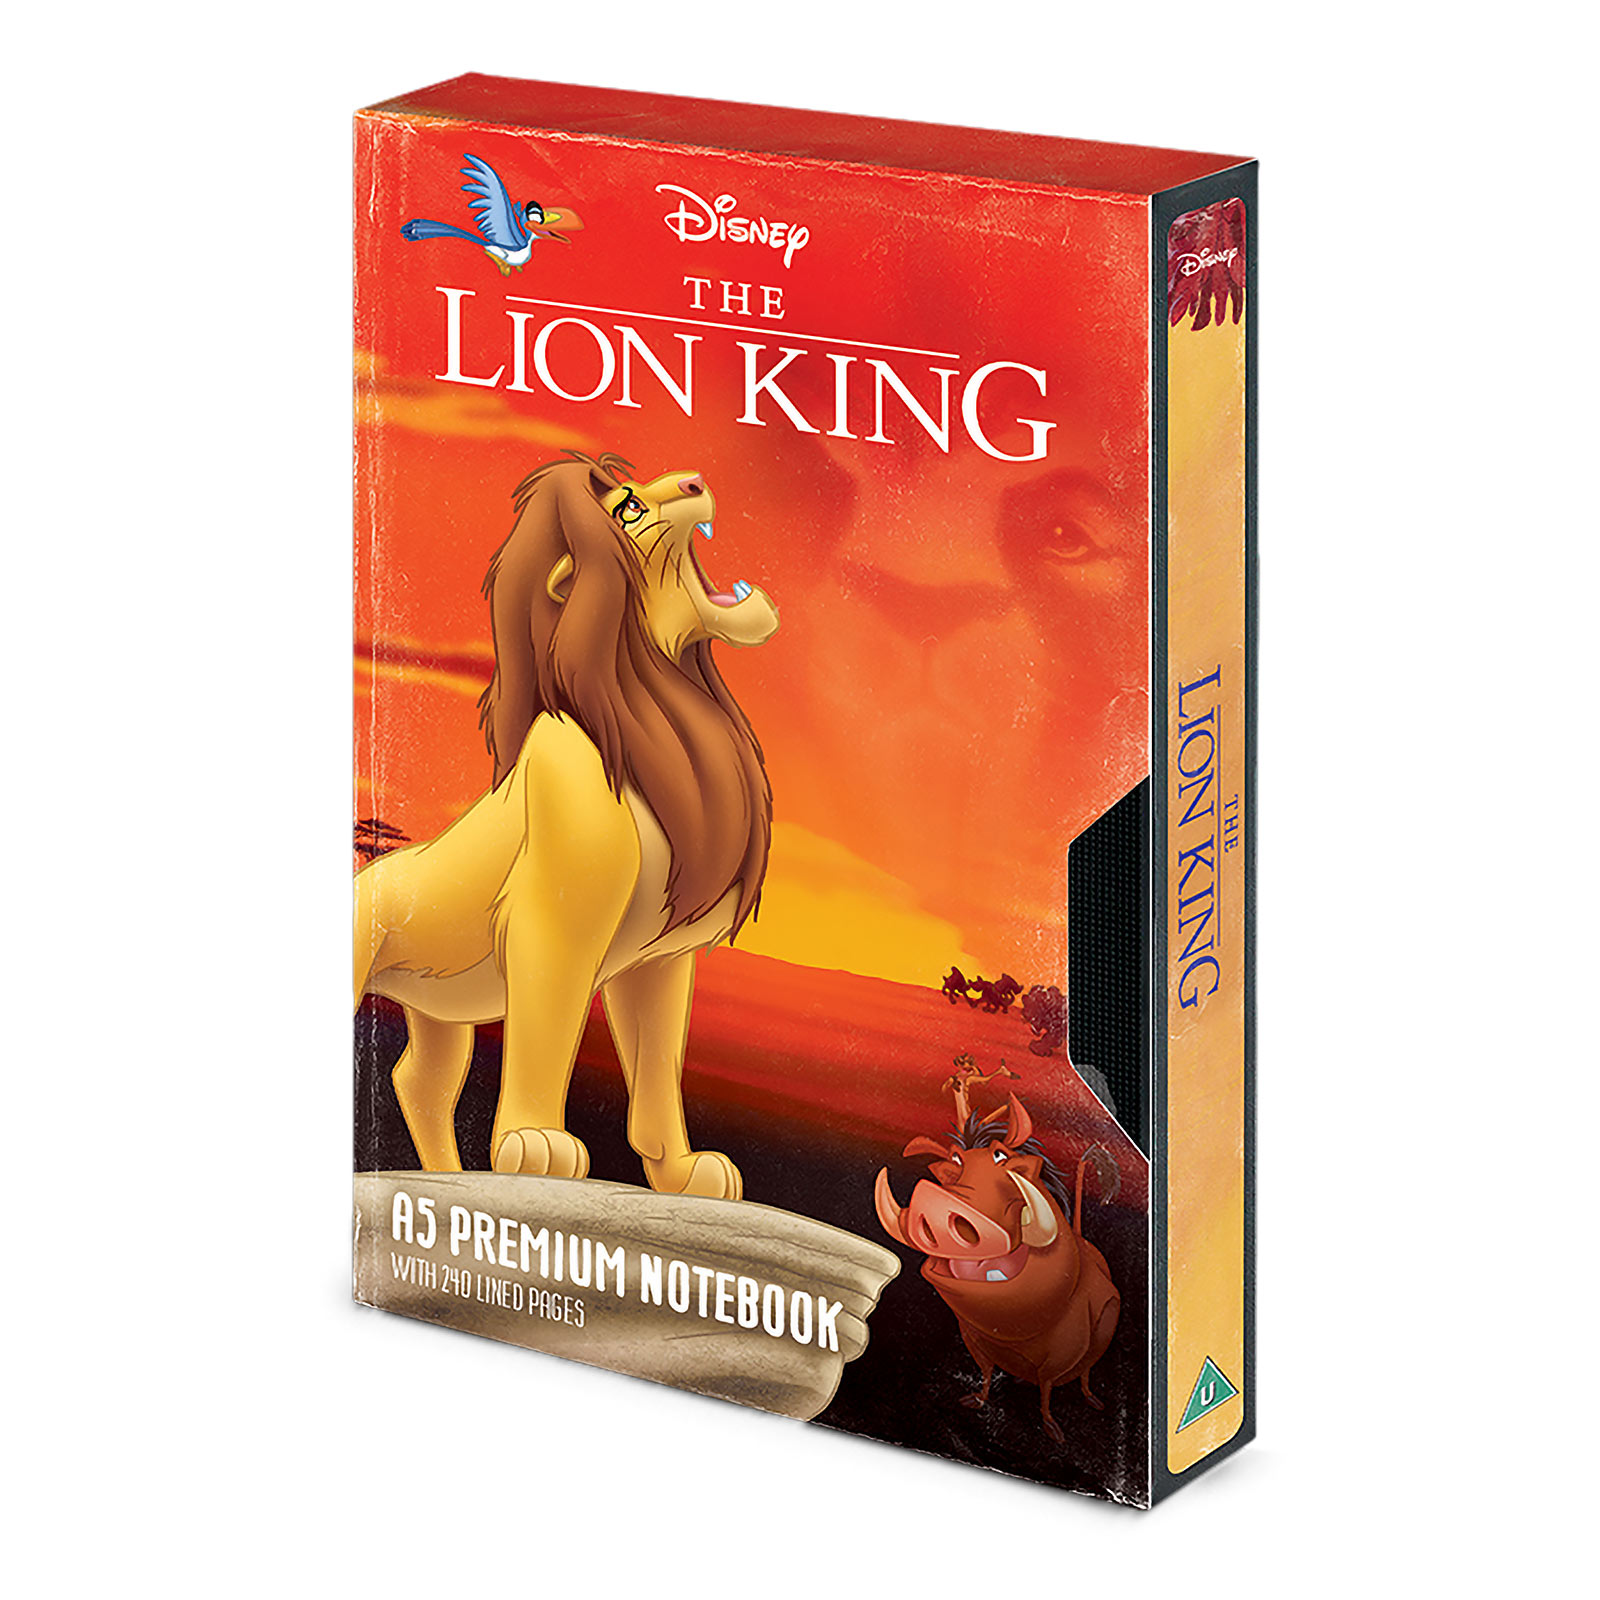 The Lion King - Circle of Life VHS Premium Notebook A5